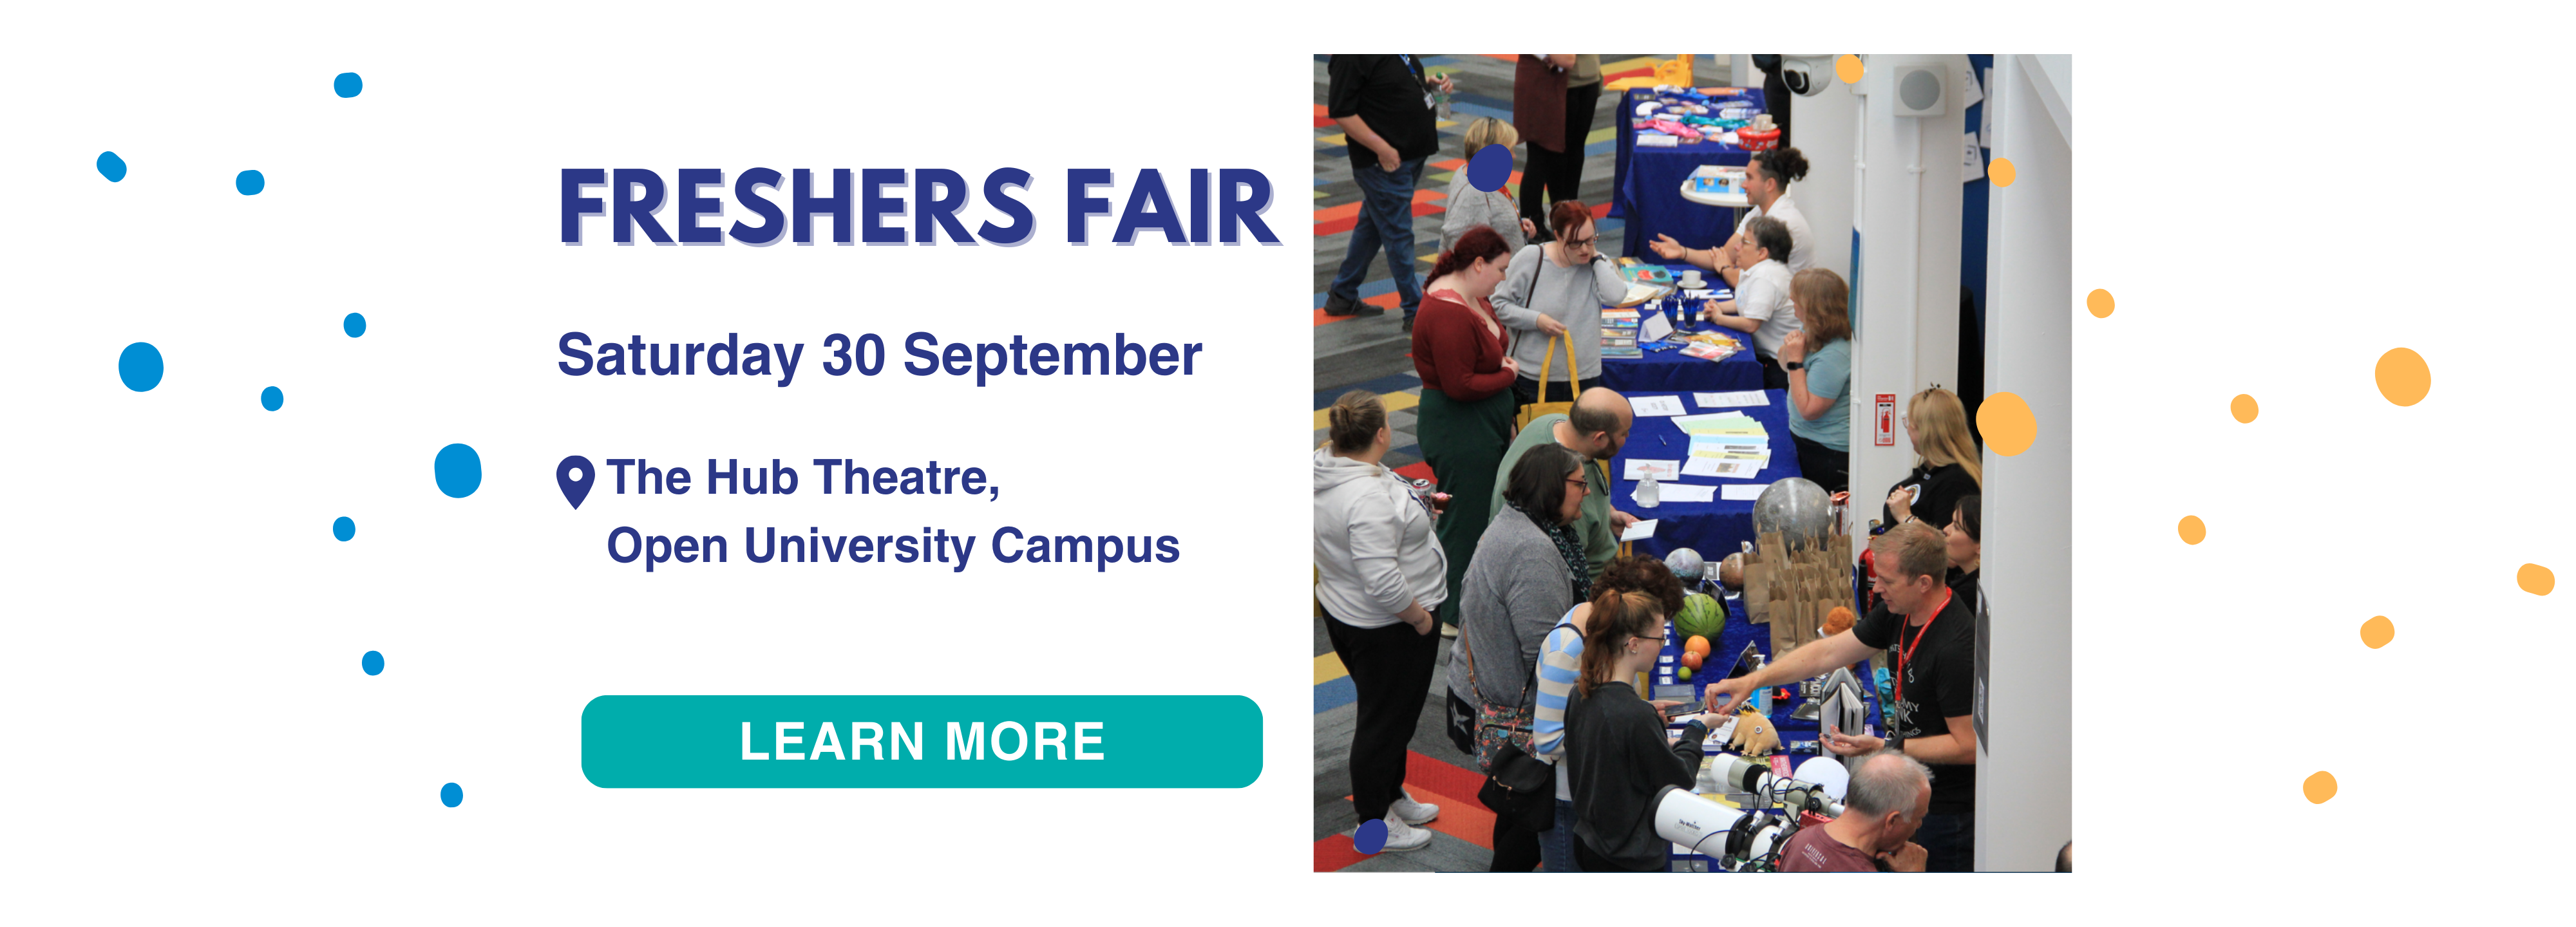 Image reads: Freshers Fair, Saturday 30 September, The Hub Theatre, Open University Campus. Click to learn more.